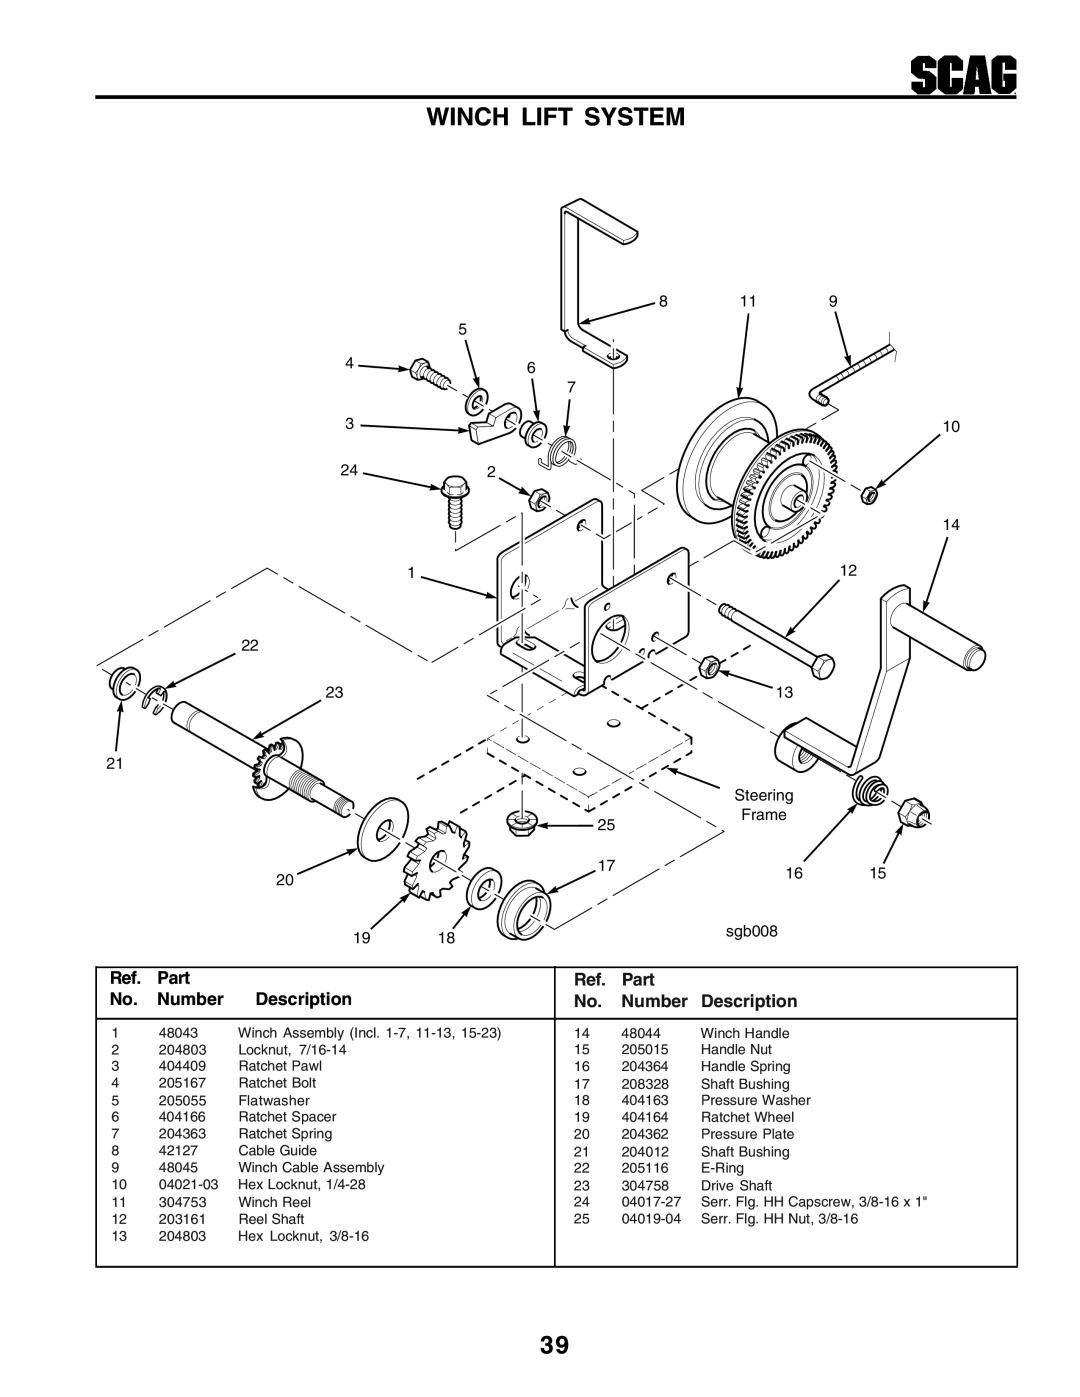 Scag Power Equipment STHM manual Winch Lift System, Part, Number, Description 